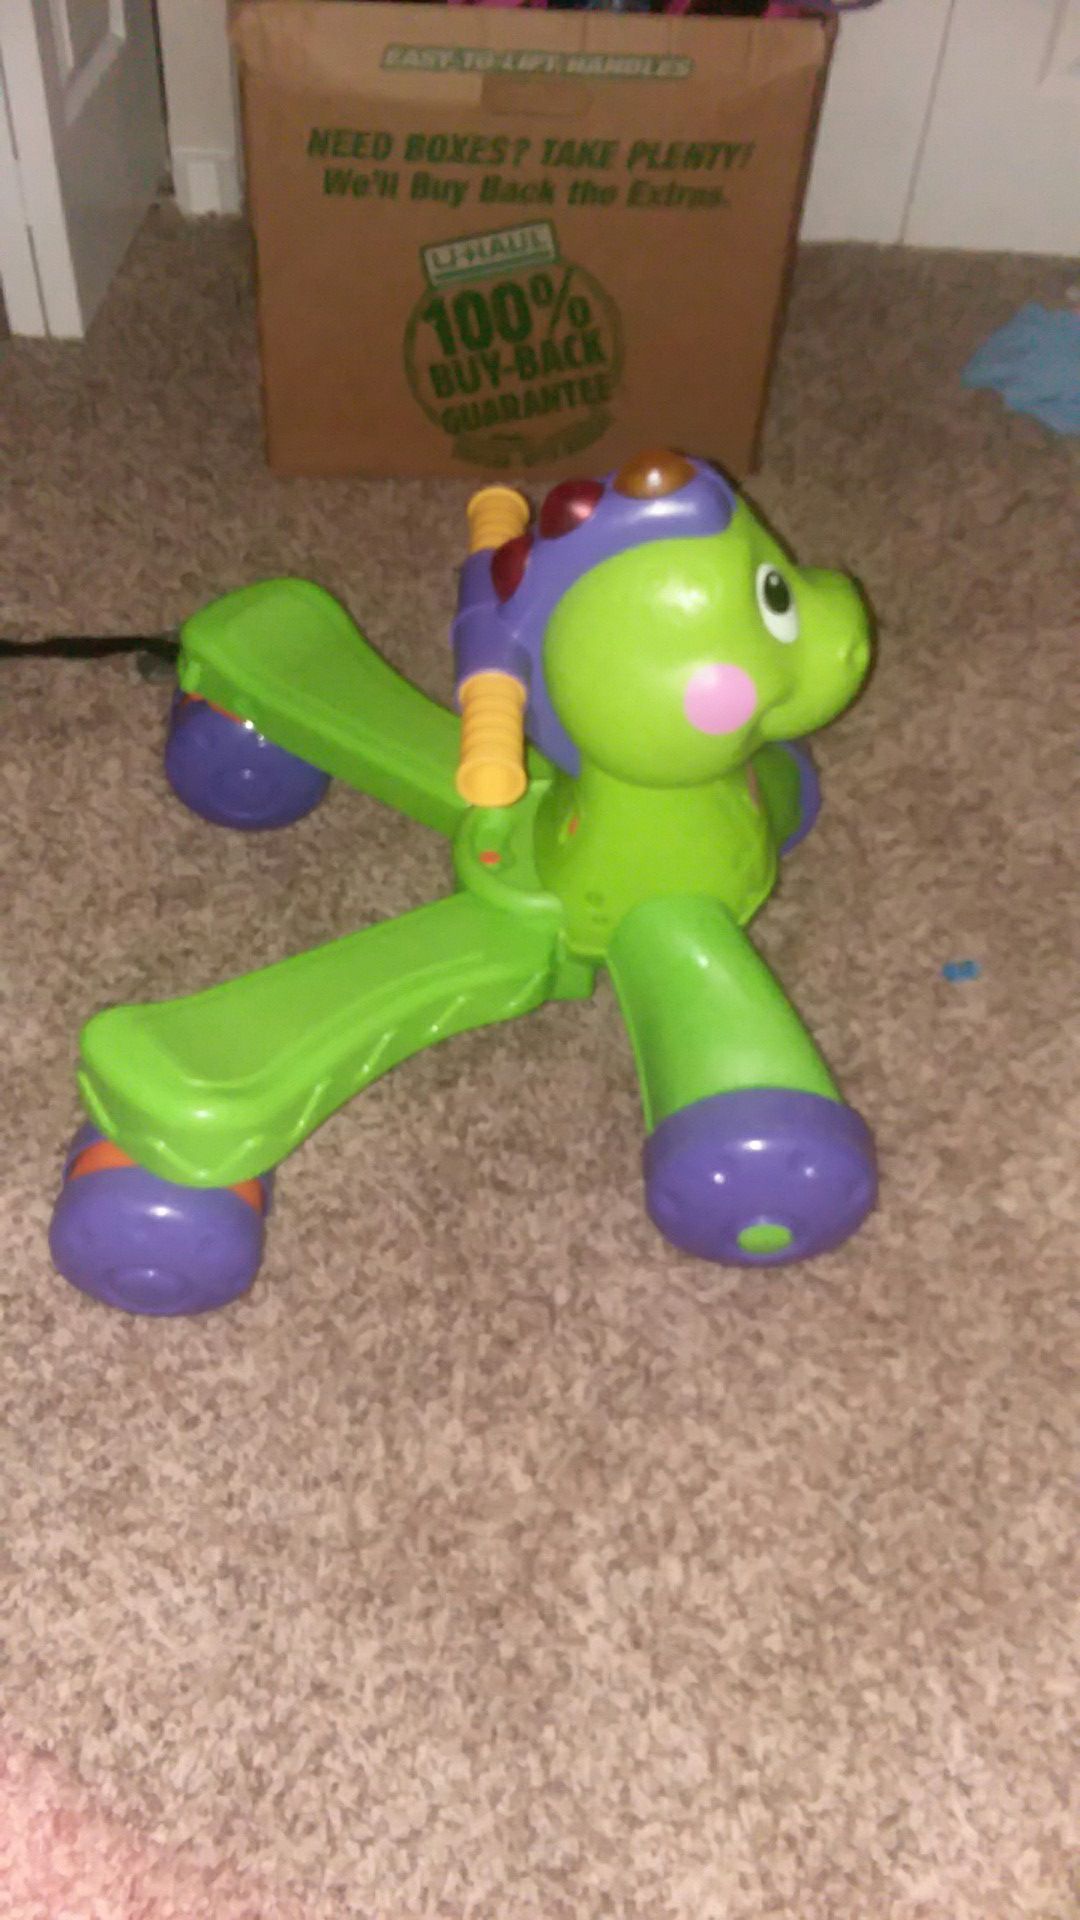 Assistant Walker and baby ride toy